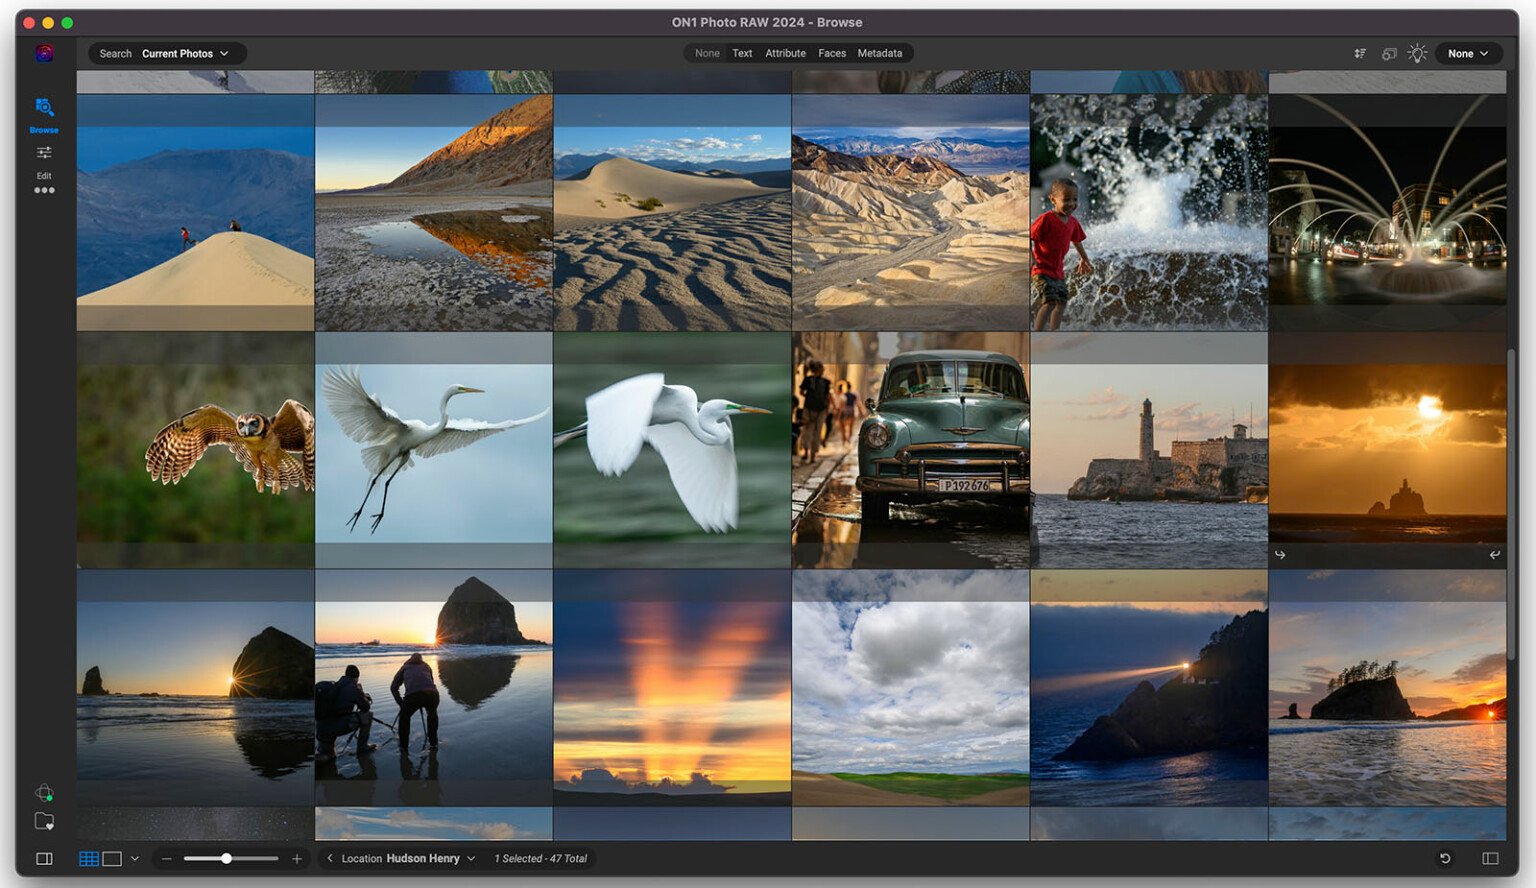 ON1 Photo RAW 2024 Features More AI Tools and Better Performance